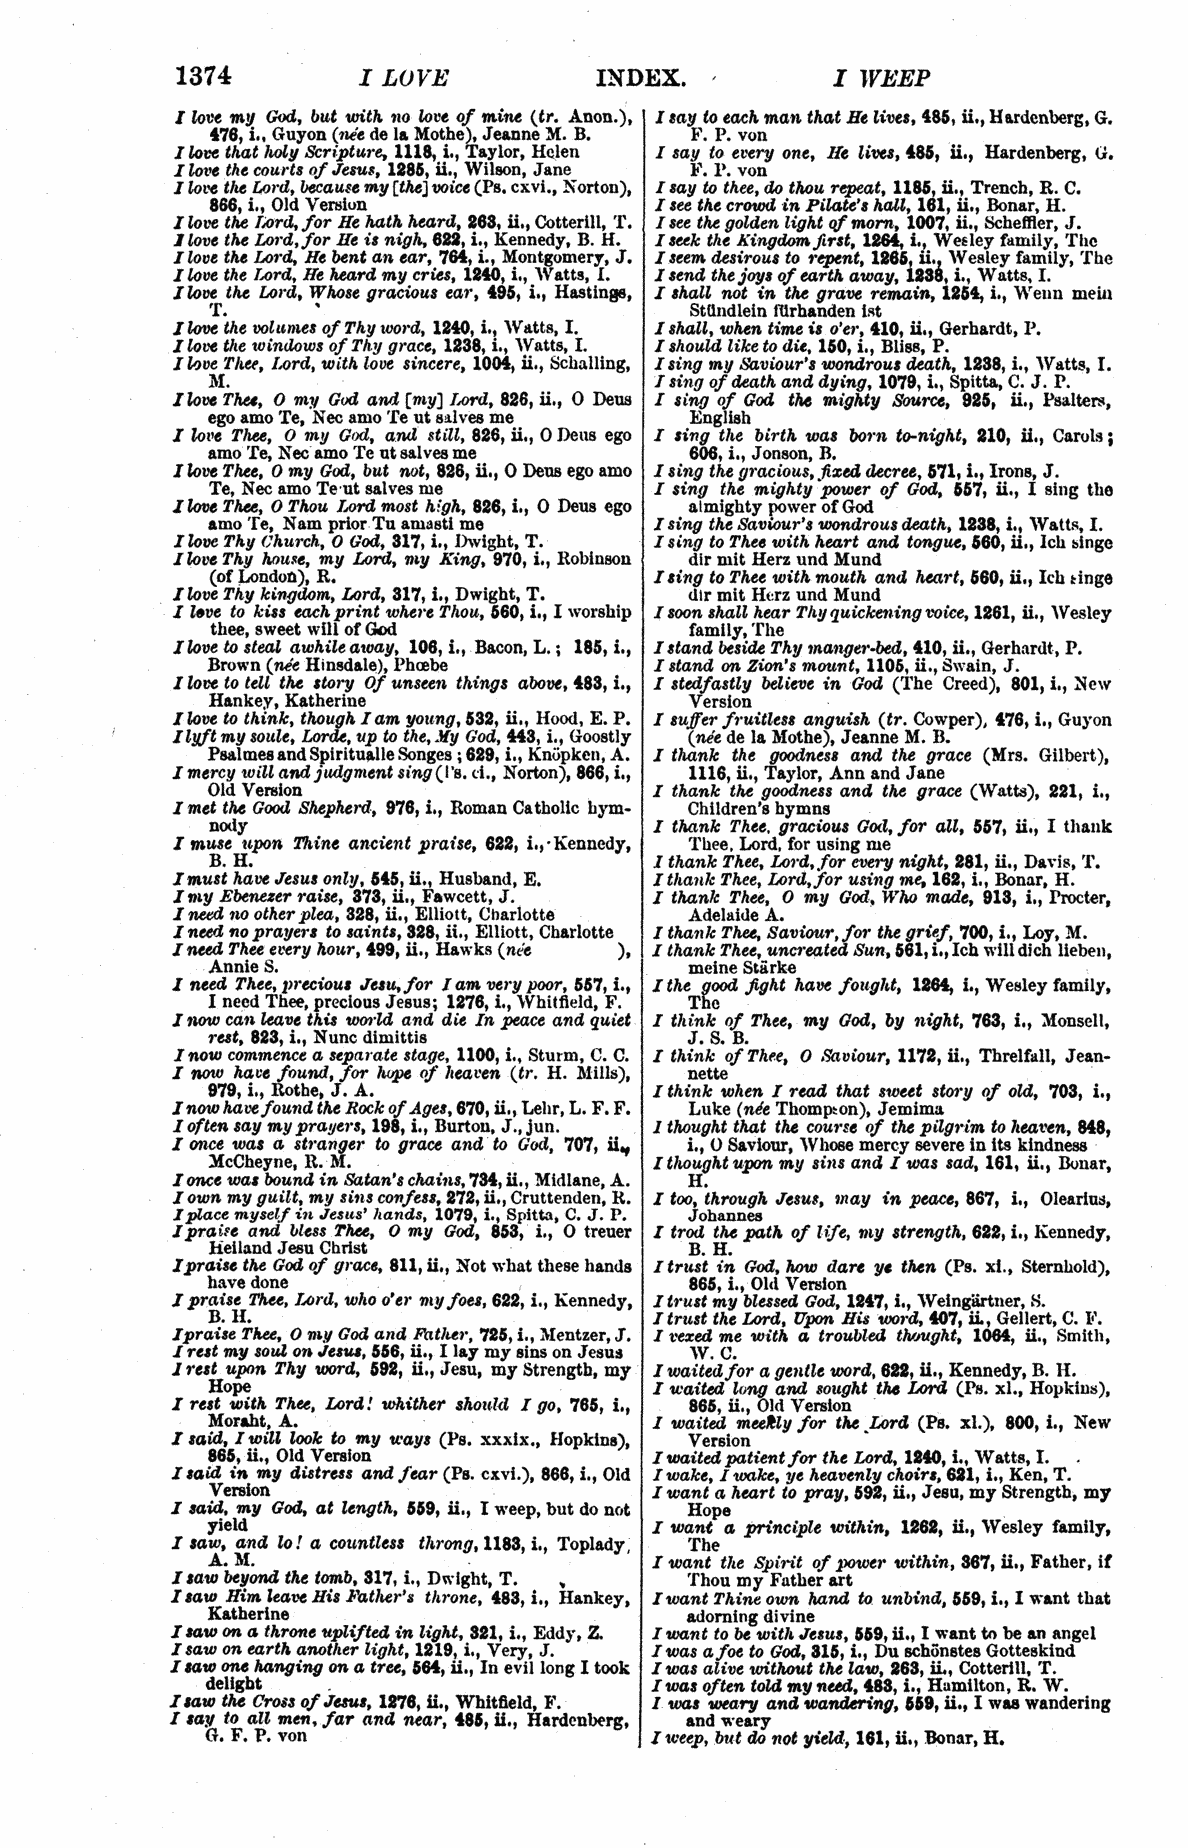 Image of page 1374